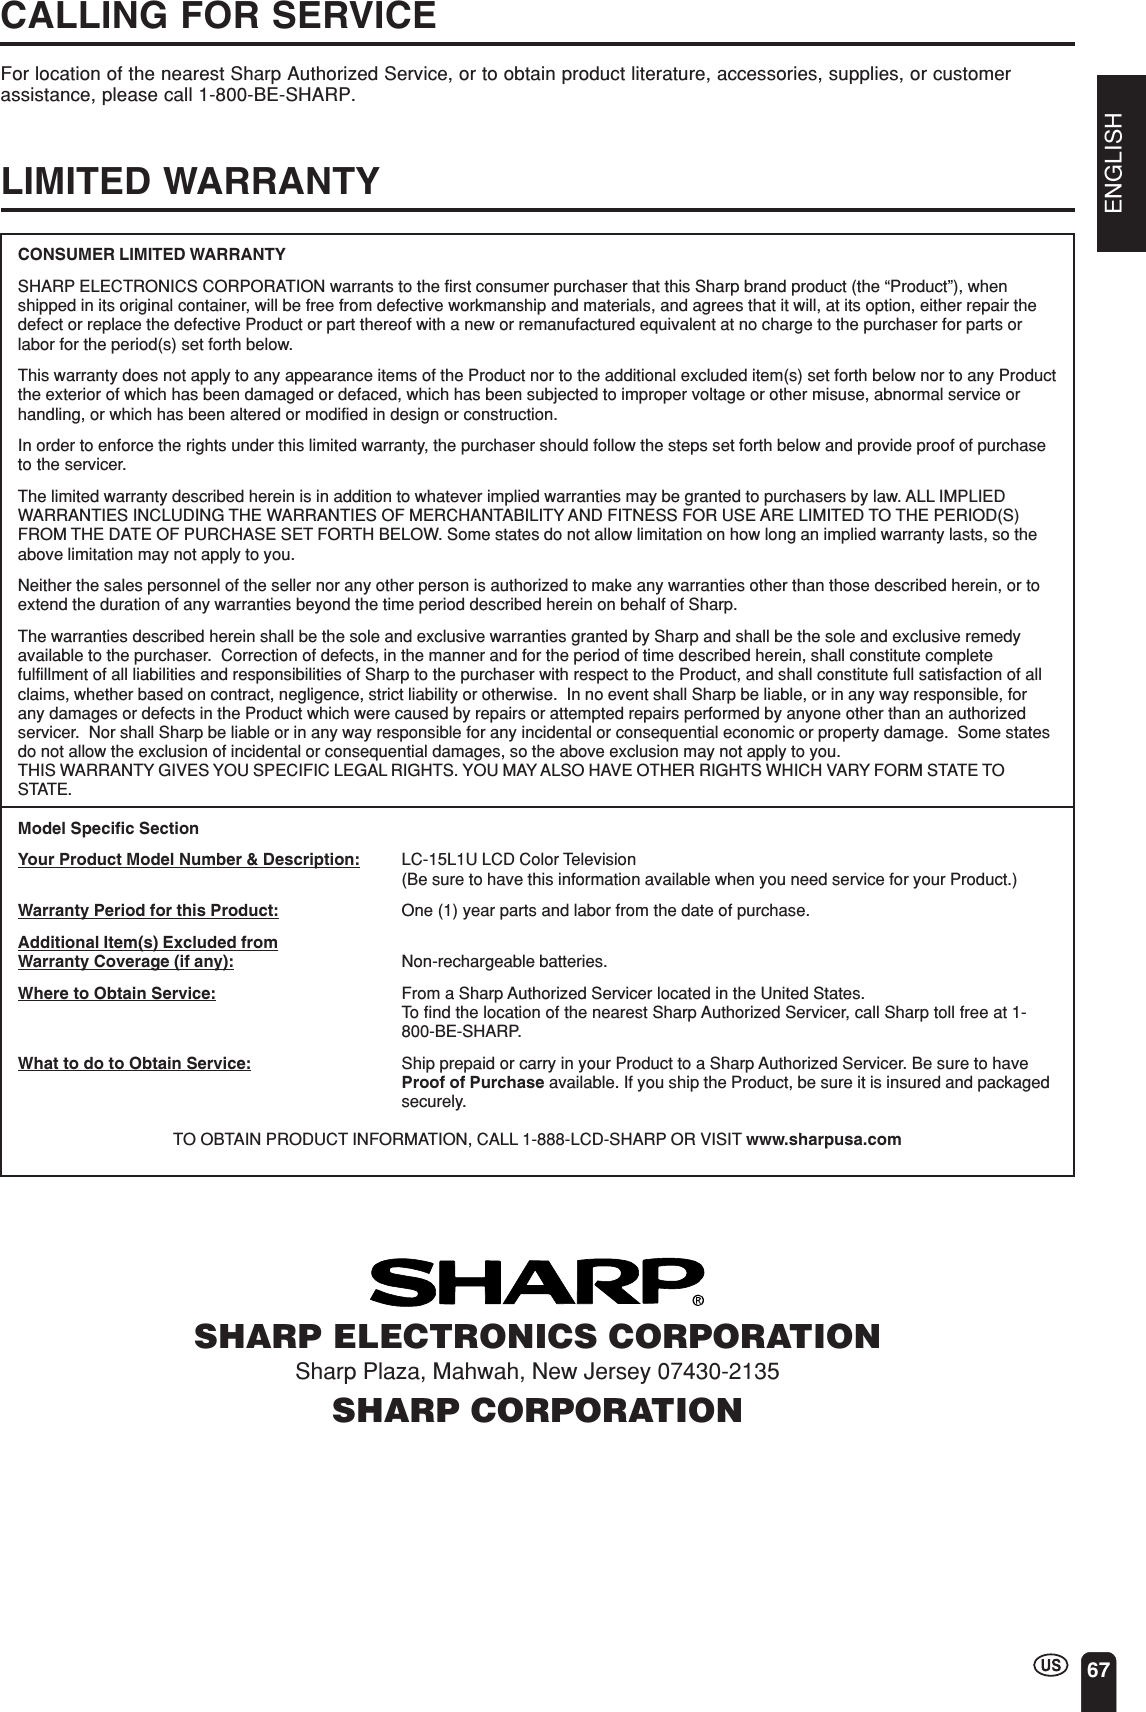 ENGLISH67CALLING FOR SERVICEFor location of the nearest Sharp Authorized Service, or to obtain product literature, accessories, supplies, or customerassistance, please call 1-800-BE-SHARP.LIMITED WARRANTYSHARP ELECTRONICS CORPORATIONSharp Plaza, Mahwah, New Jersey 07430-2135SHARP CORPORATIONCONSUMER LIMITED WARRANTYSHARP ELECTRONICS CORPORATION warrants to the first consumer purchaser that this Sharp brand product (the “Product”), whenshipped in its original container, will be free from defective workmanship and materials, and agrees that it will, at its option, either repair thedefect or replace the defective Product or part thereof with a new or remanufactured equivalent at no charge to the purchaser for parts orlabor for the period(s) set forth below.This warranty does not apply to any appearance items of the Product nor to the additional excluded item(s) set forth below nor to any Productthe exterior of which has been damaged or defaced, which has been subjected to improper voltage or other misuse, abnormal service orhandling, or which has been altered or modified in design or construction.In order to enforce the rights under this limited warranty, the purchaser should follow the steps set forth below and provide proof of purchaseto the servicer.The limited warranty described herein is in addition to whatever implied warranties may be granted to purchasers by law. ALL IMPLIEDWARRANTIES INCLUDING THE WARRANTIES OF MERCHANTABILITY AND FITNESS FOR USE ARE LIMITED TO THE PERIOD(S)FROM THE DATE OF PURCHASE SET FORTH BELOW. Some states do not allow limitation on how long an implied warranty lasts, so theabove limitation may not apply to you.Neither the sales personnel of the seller nor any other person is authorized to make any warranties other than those described herein, or toextend the duration of any warranties beyond the time period described herein on behalf of Sharp.The warranties described herein shall be the sole and exclusive warranties granted by Sharp and shall be the sole and exclusive remedyavailable to the purchaser.  Correction of defects, in the manner and for the period of time described herein, shall constitute completefulfillment of all liabilities and responsibilities of Sharp to the purchaser with respect to the Product, and shall constitute full satisfaction of allclaims, whether based on contract, negligence, strict liability or otherwise.  In no event shall Sharp be liable, or in any way responsible, forany damages or defects in the Product which were caused by repairs or attempted repairs performed by anyone other than an authorizedservicer.  Nor shall Sharp be liable or in any way responsible for any incidental or consequential economic or property damage.  Some statesdo not allow the exclusion of incidental or consequential damages, so the above exclusion may not apply to you.THIS WARRANTY GIVES YOU SPECIFIC LEGAL RIGHTS. YOU MAY ALSO HAVE OTHER RIGHTS WHICH VARY FORM STATE TOSTATE.Model Specific SectionYour Product Model Number &amp; Description: LC-15L1U LCD Color Television(Be sure to have this information available when you need service for your Product.)Warranty Period for this Product: One (1) year parts and labor from the date of purchase.Additional Item(s) Excluded fromWarranty Coverage (if any): Non-rechargeable batteries.Where to Obtain Service: From a Sharp Authorized Servicer located in the United States.To find the location of the nearest Sharp Authorized Servicer, call Sharp toll free at 1-800-BE-SHARP.What to do to Obtain Service: Ship prepaid or carry in your Product to a Sharp Authorized Servicer. Be sure to haveProof of Purchase available. If you ship the Product, be sure it is insured and packagedsecurely.TO OBTAIN PRODUCT INFORMATION, CALL 1-888-LCD-SHARP OR VISIT www.sharpusa.com